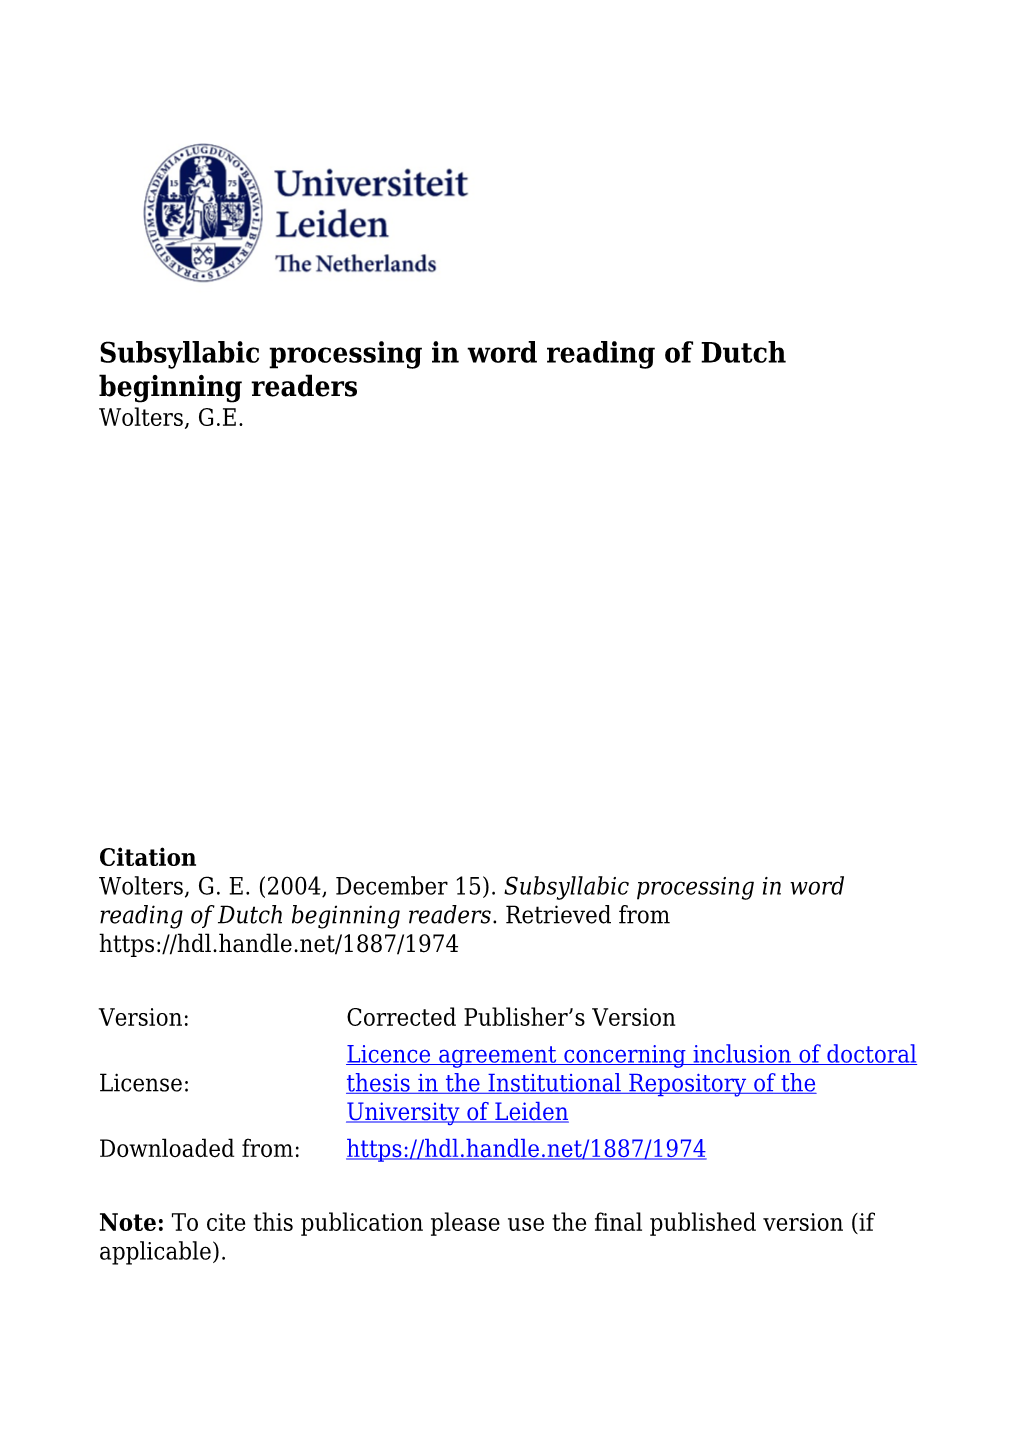 Subsyllabic Processing in Word Reading of Dutch Beginning Readers Wolters, G.E